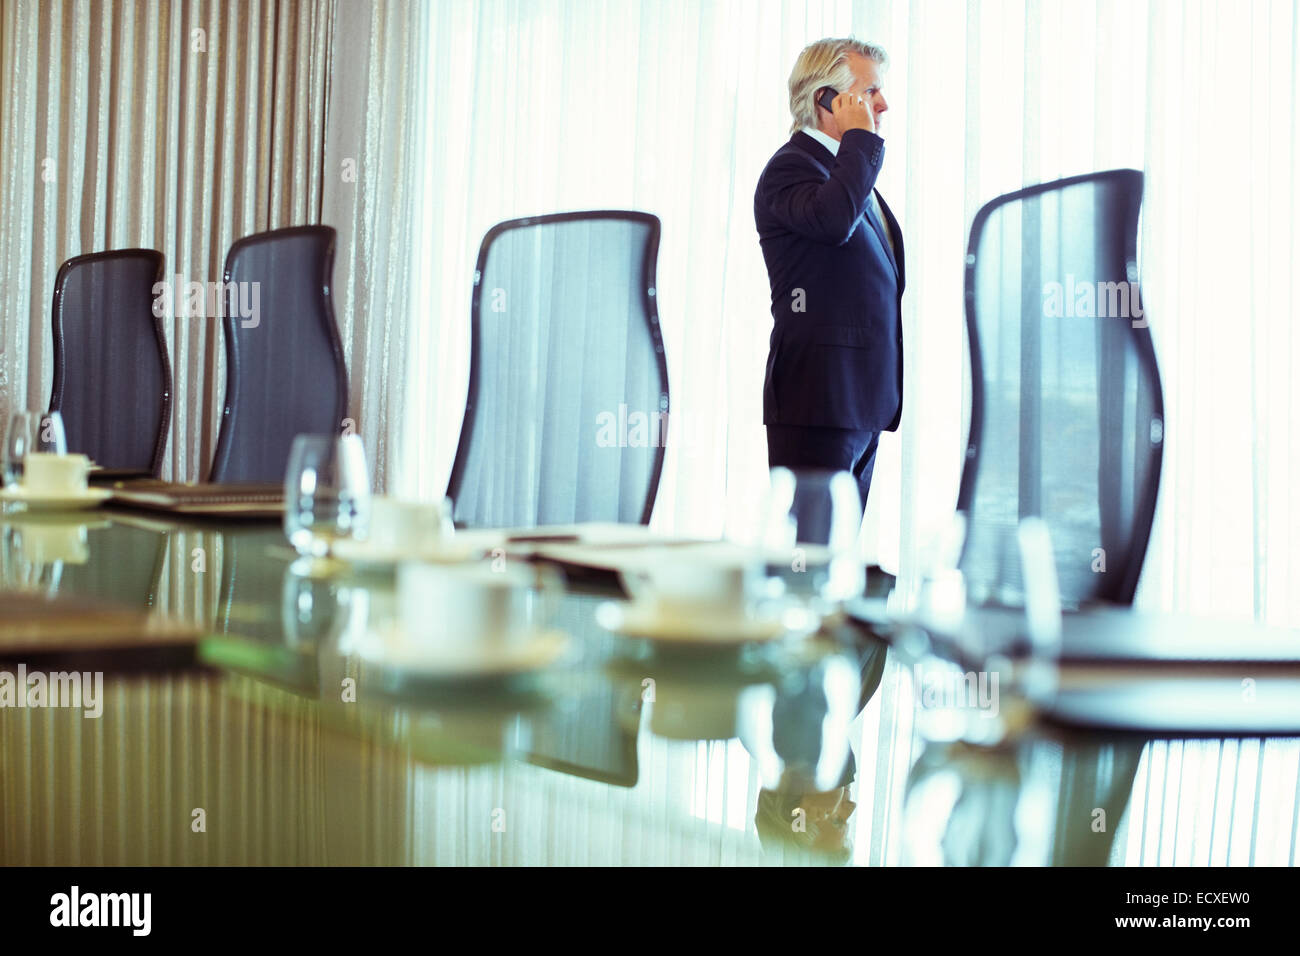 Businessman looking out of window and using mobile phone in conference room Stock Photo